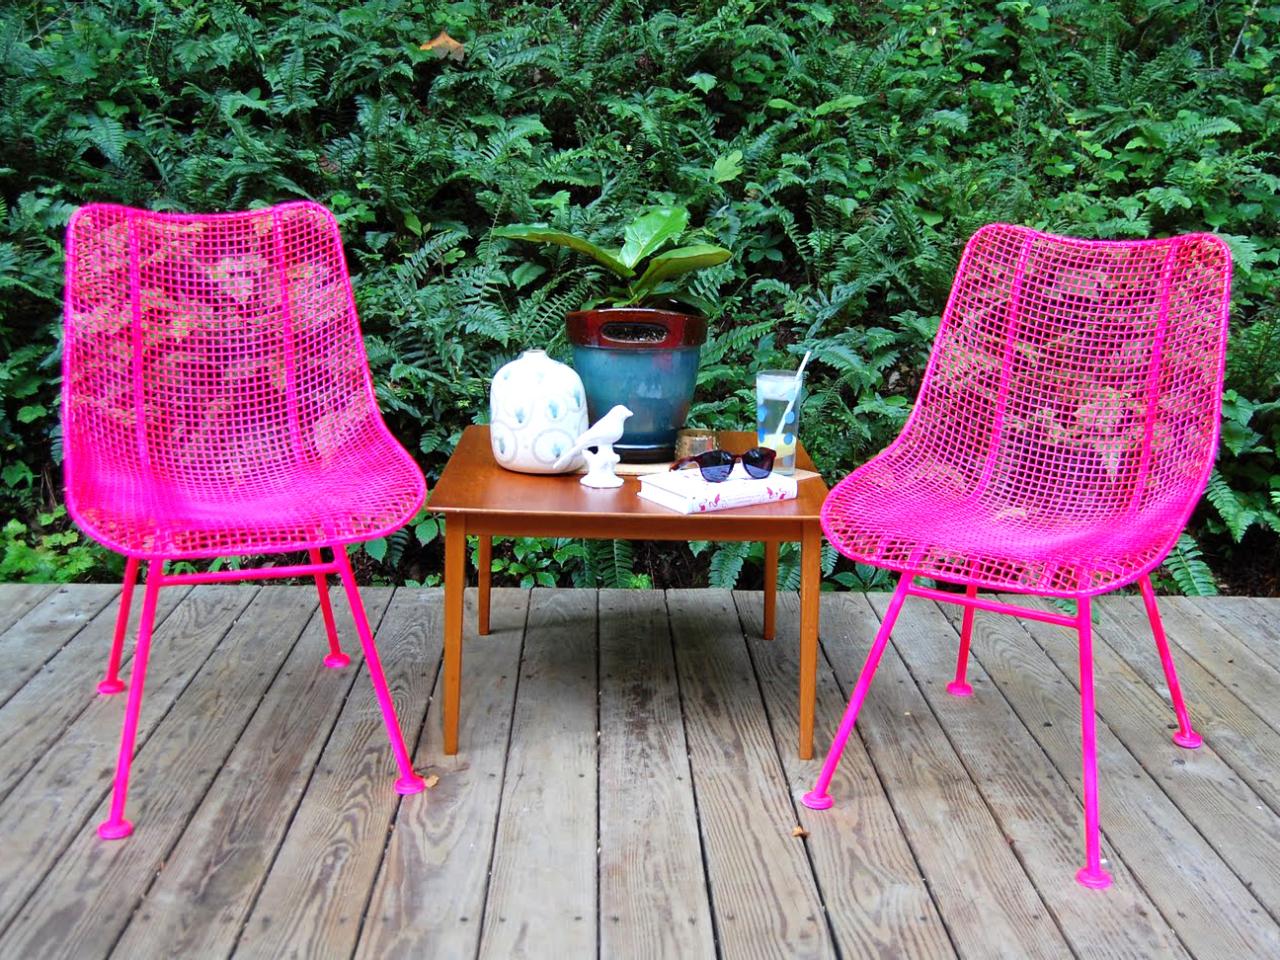 How To Paint Metal Chairs Tos Diy, How Do You Prepare Outdoor Metal Furniture For Painting